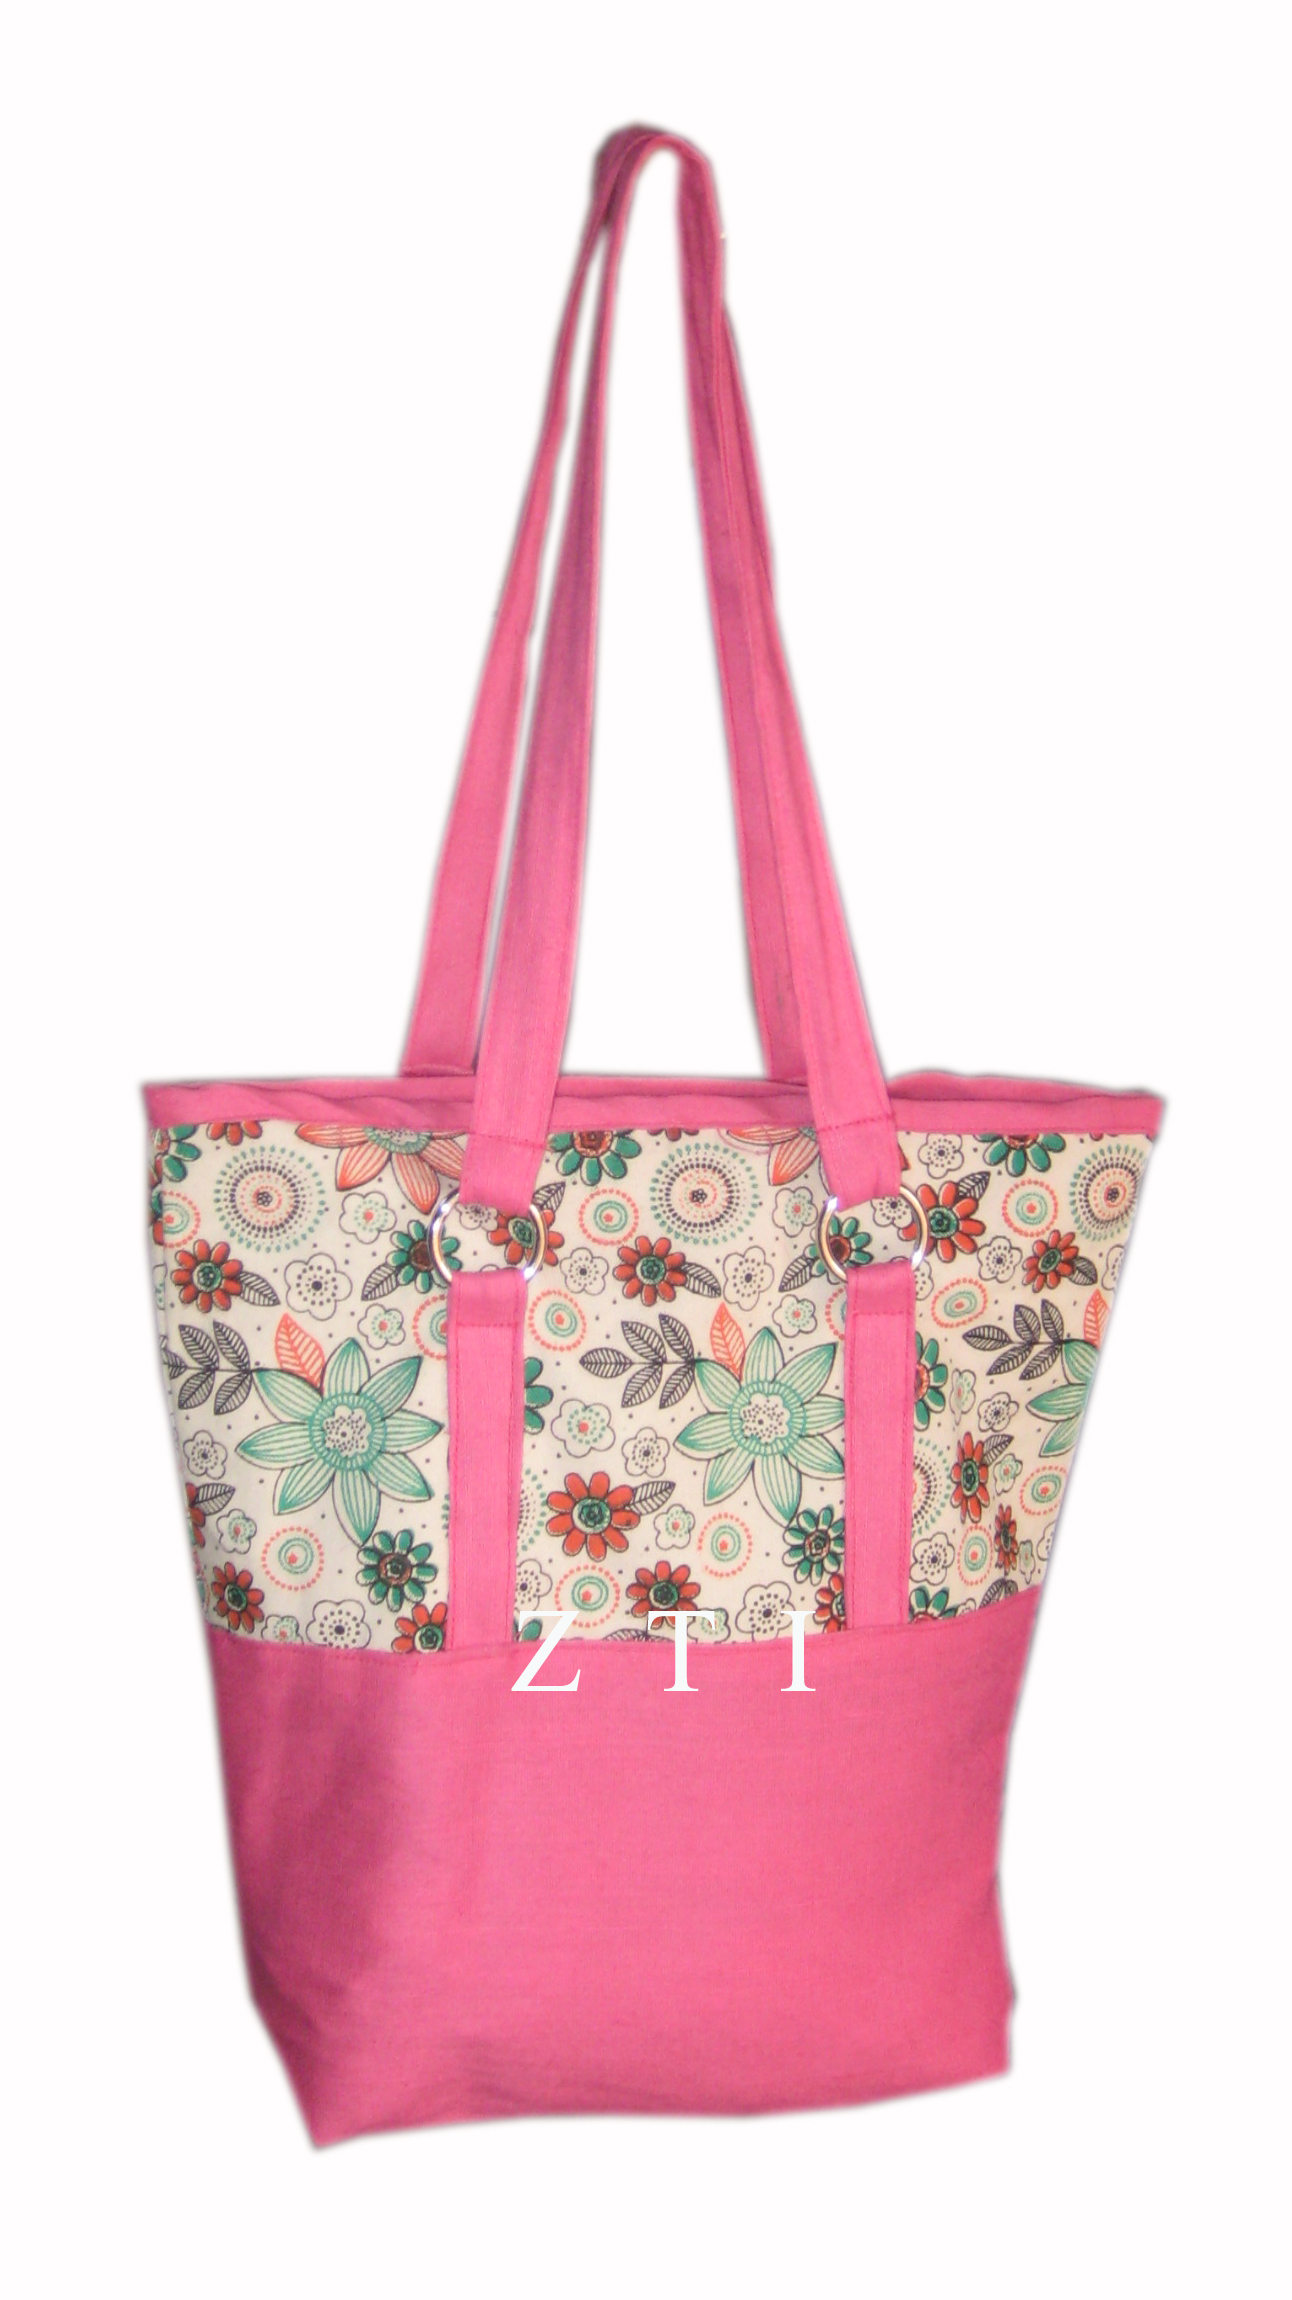 MODEL-NO.-CPR-1285-SIZE-36x3612cms.-PRICE-US-1.60